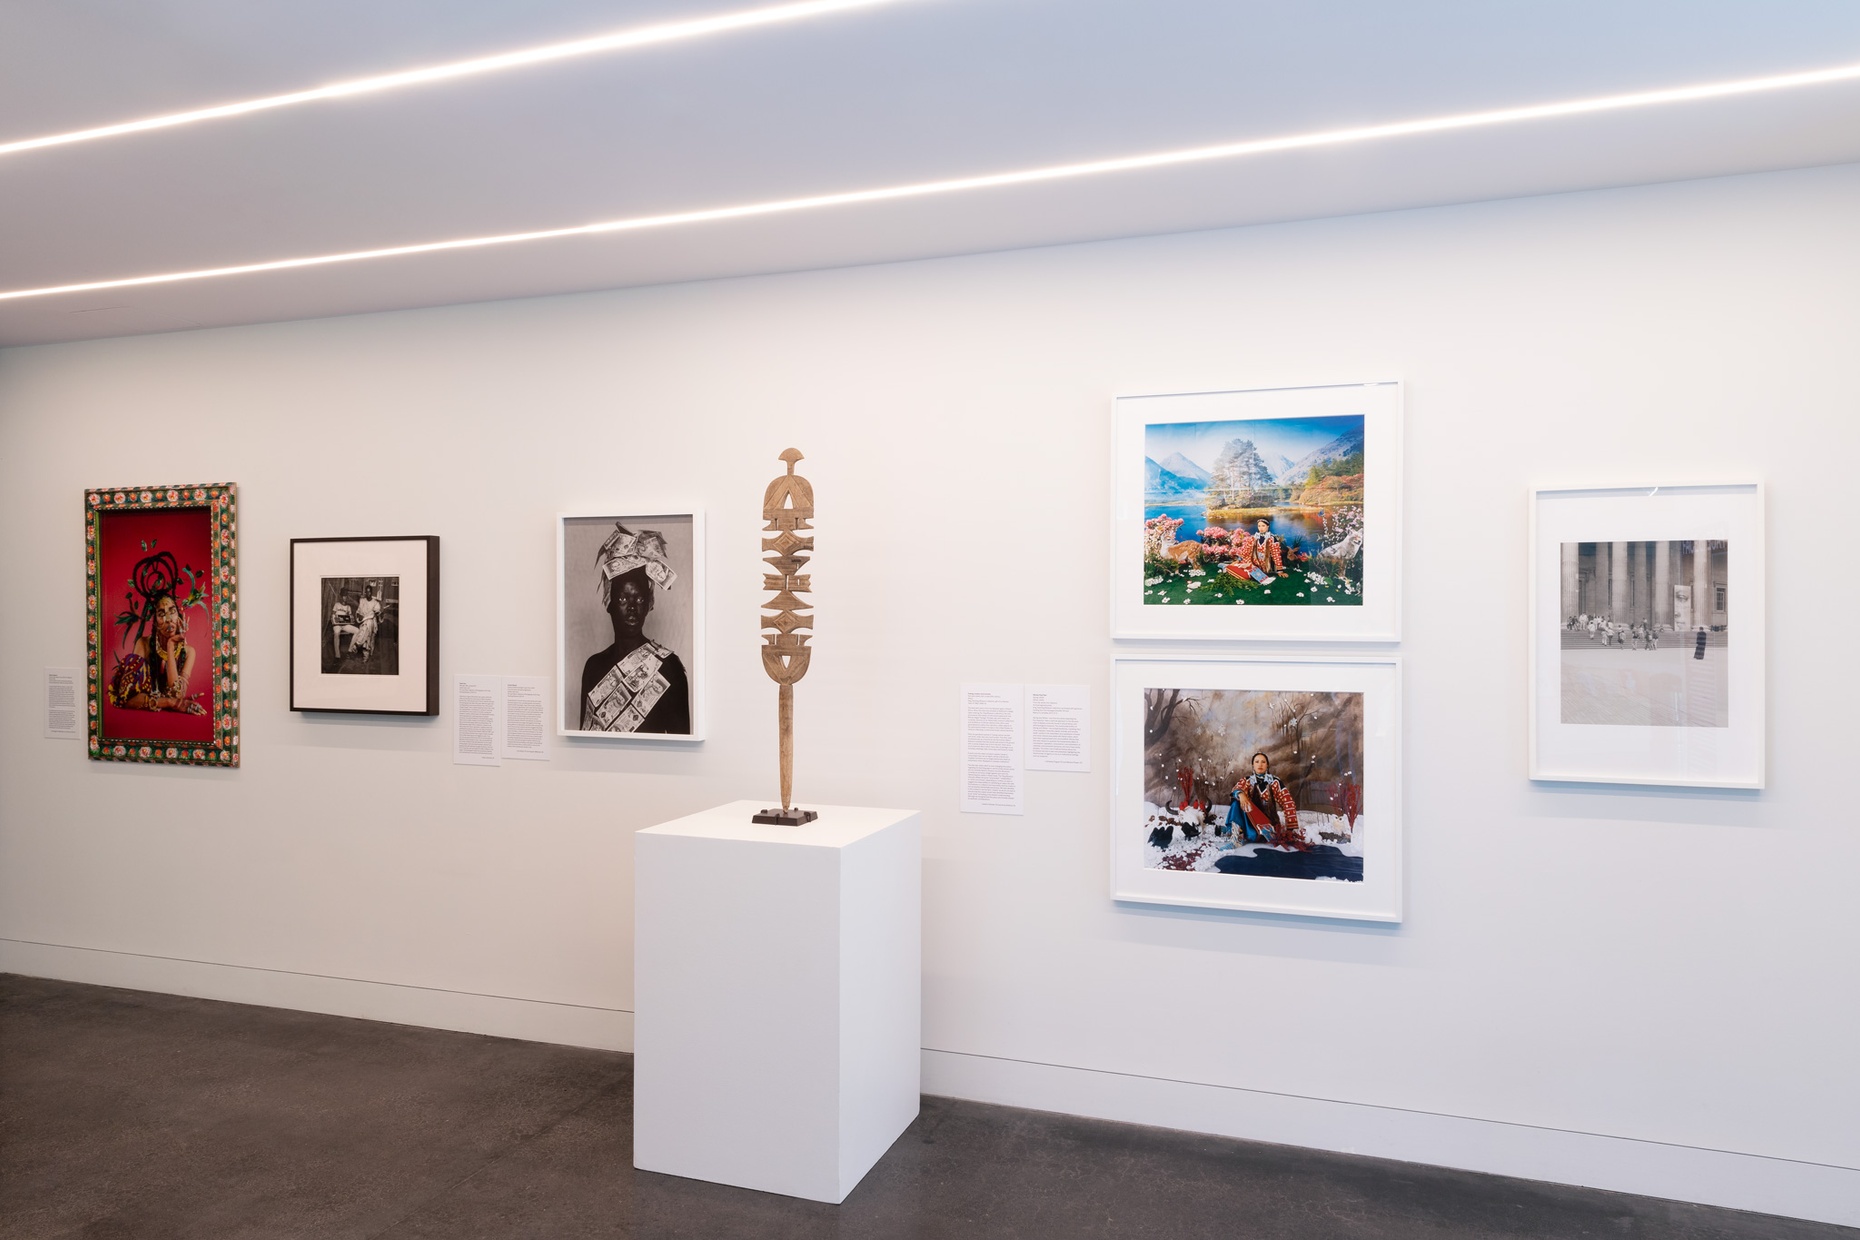 A gallery wall displaying multiple framed photographs and one wooden sculpture on a pedestal.